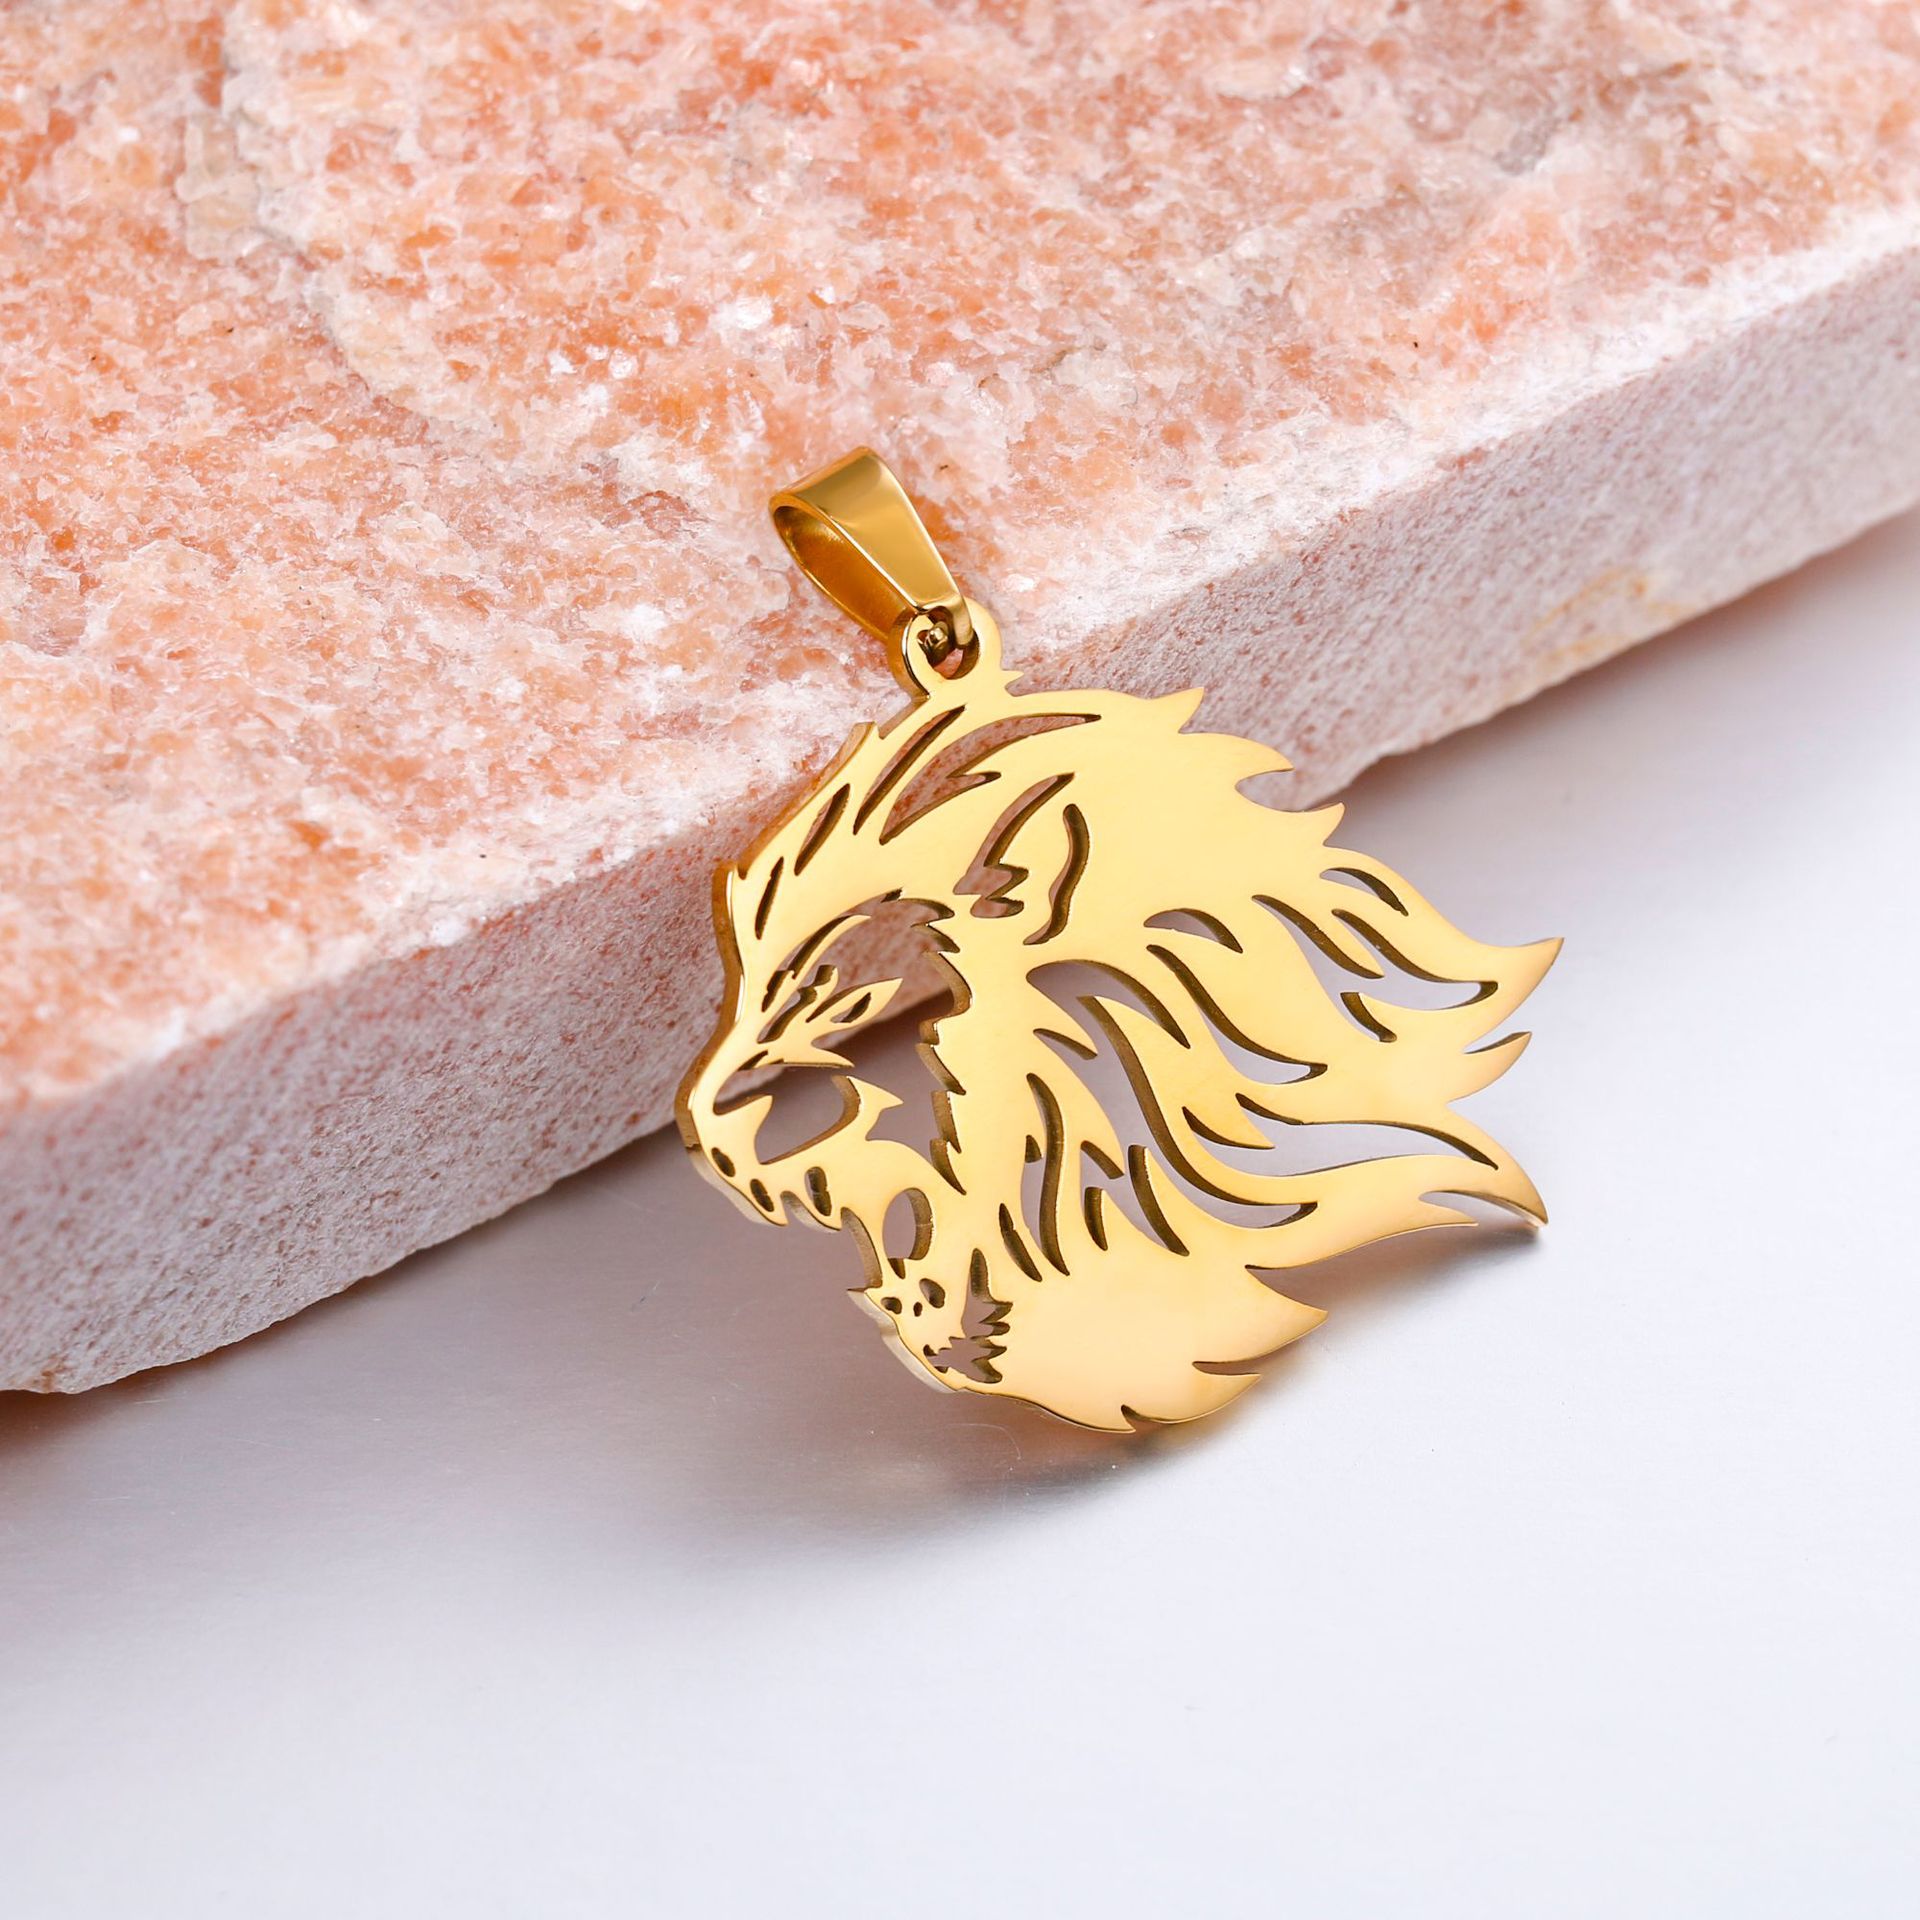 The Lion is golden